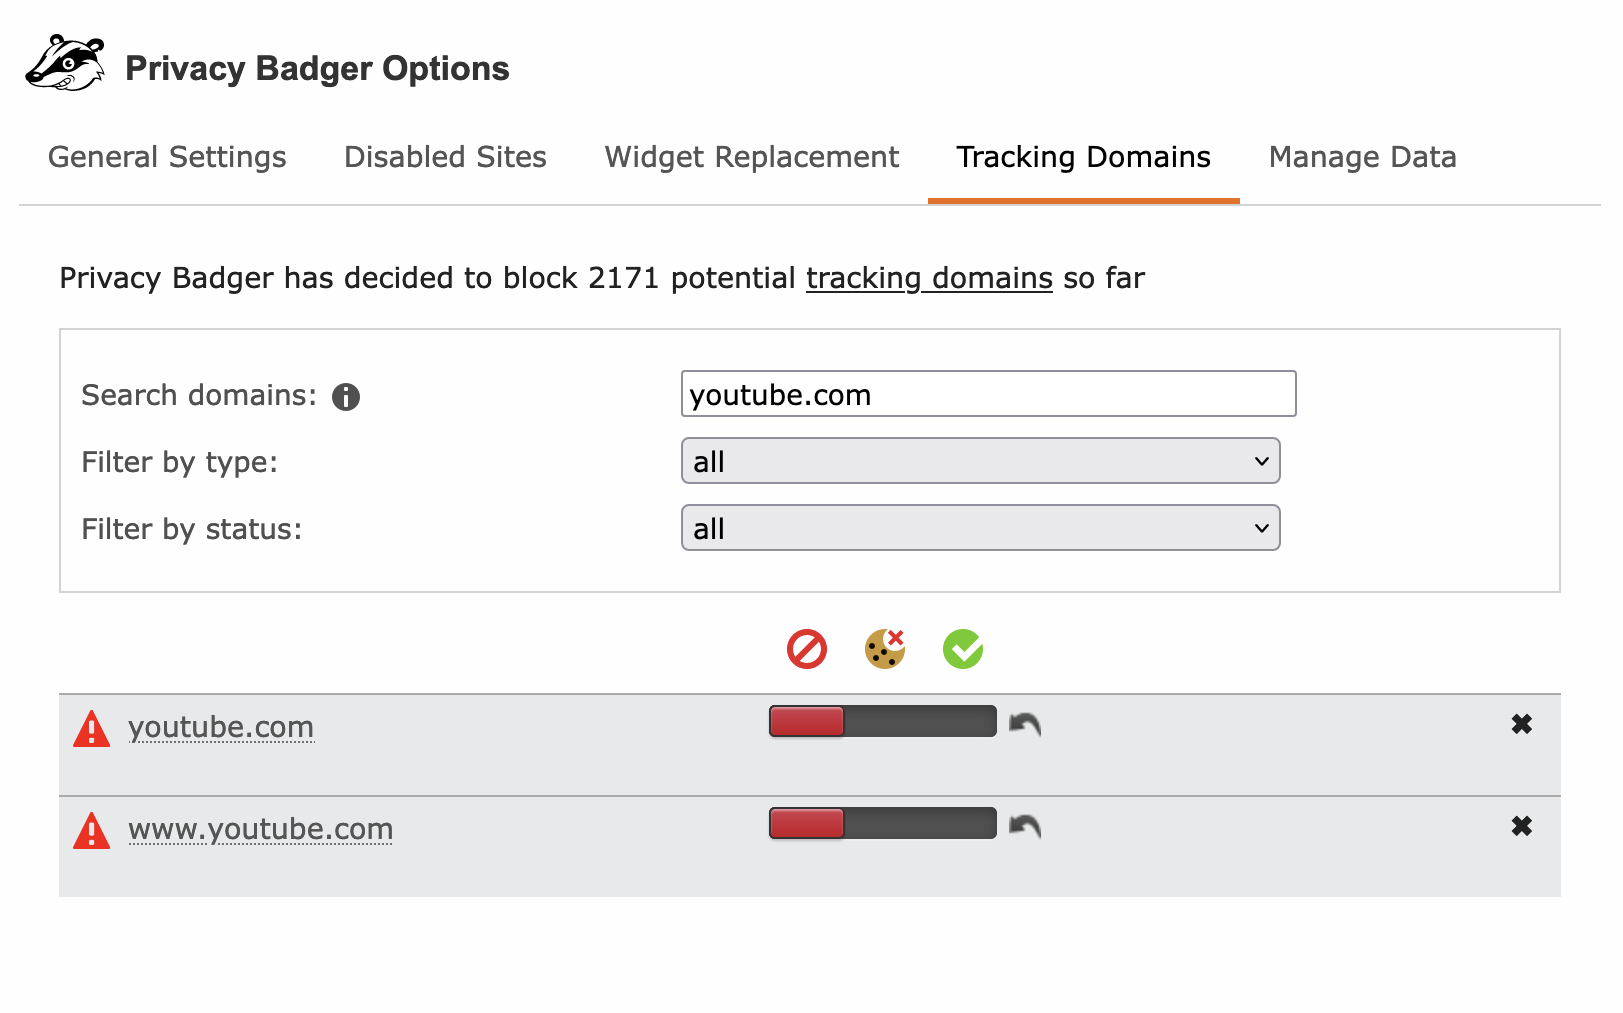 A screenshot of Privacy Badger’s options page with the Tracking Domains tab selected. The list of tracking domains was filtered for “youtube.com”; the slider for youtube.com was moved to the “Block entirely” position.